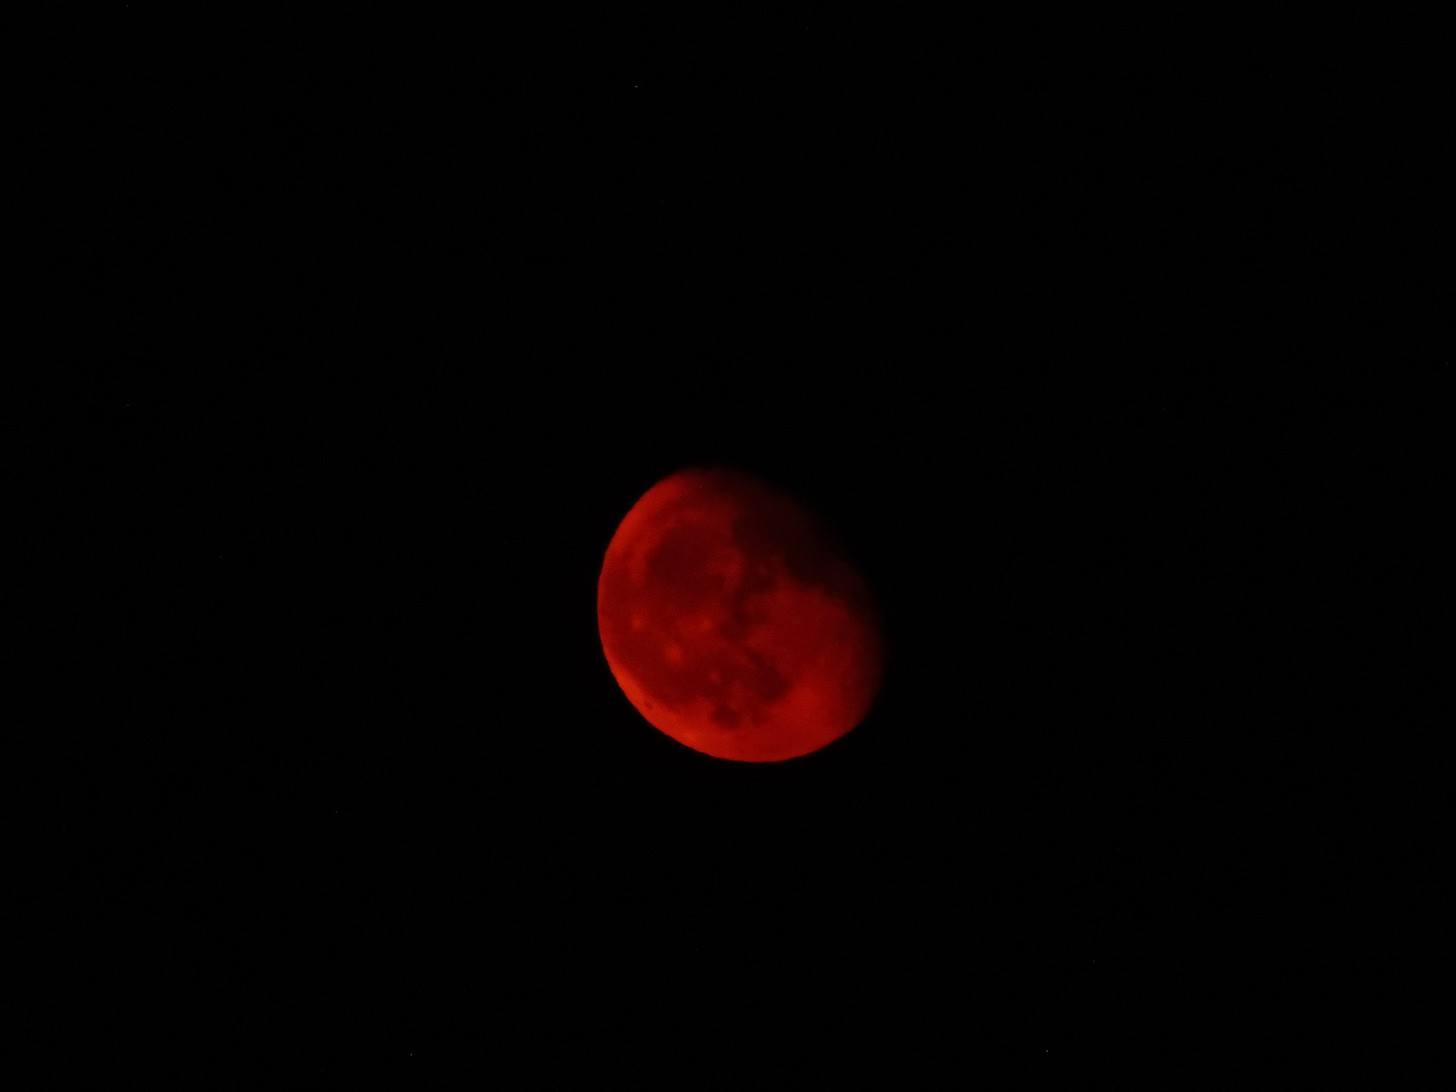 A blood red moon surrounded by black sky